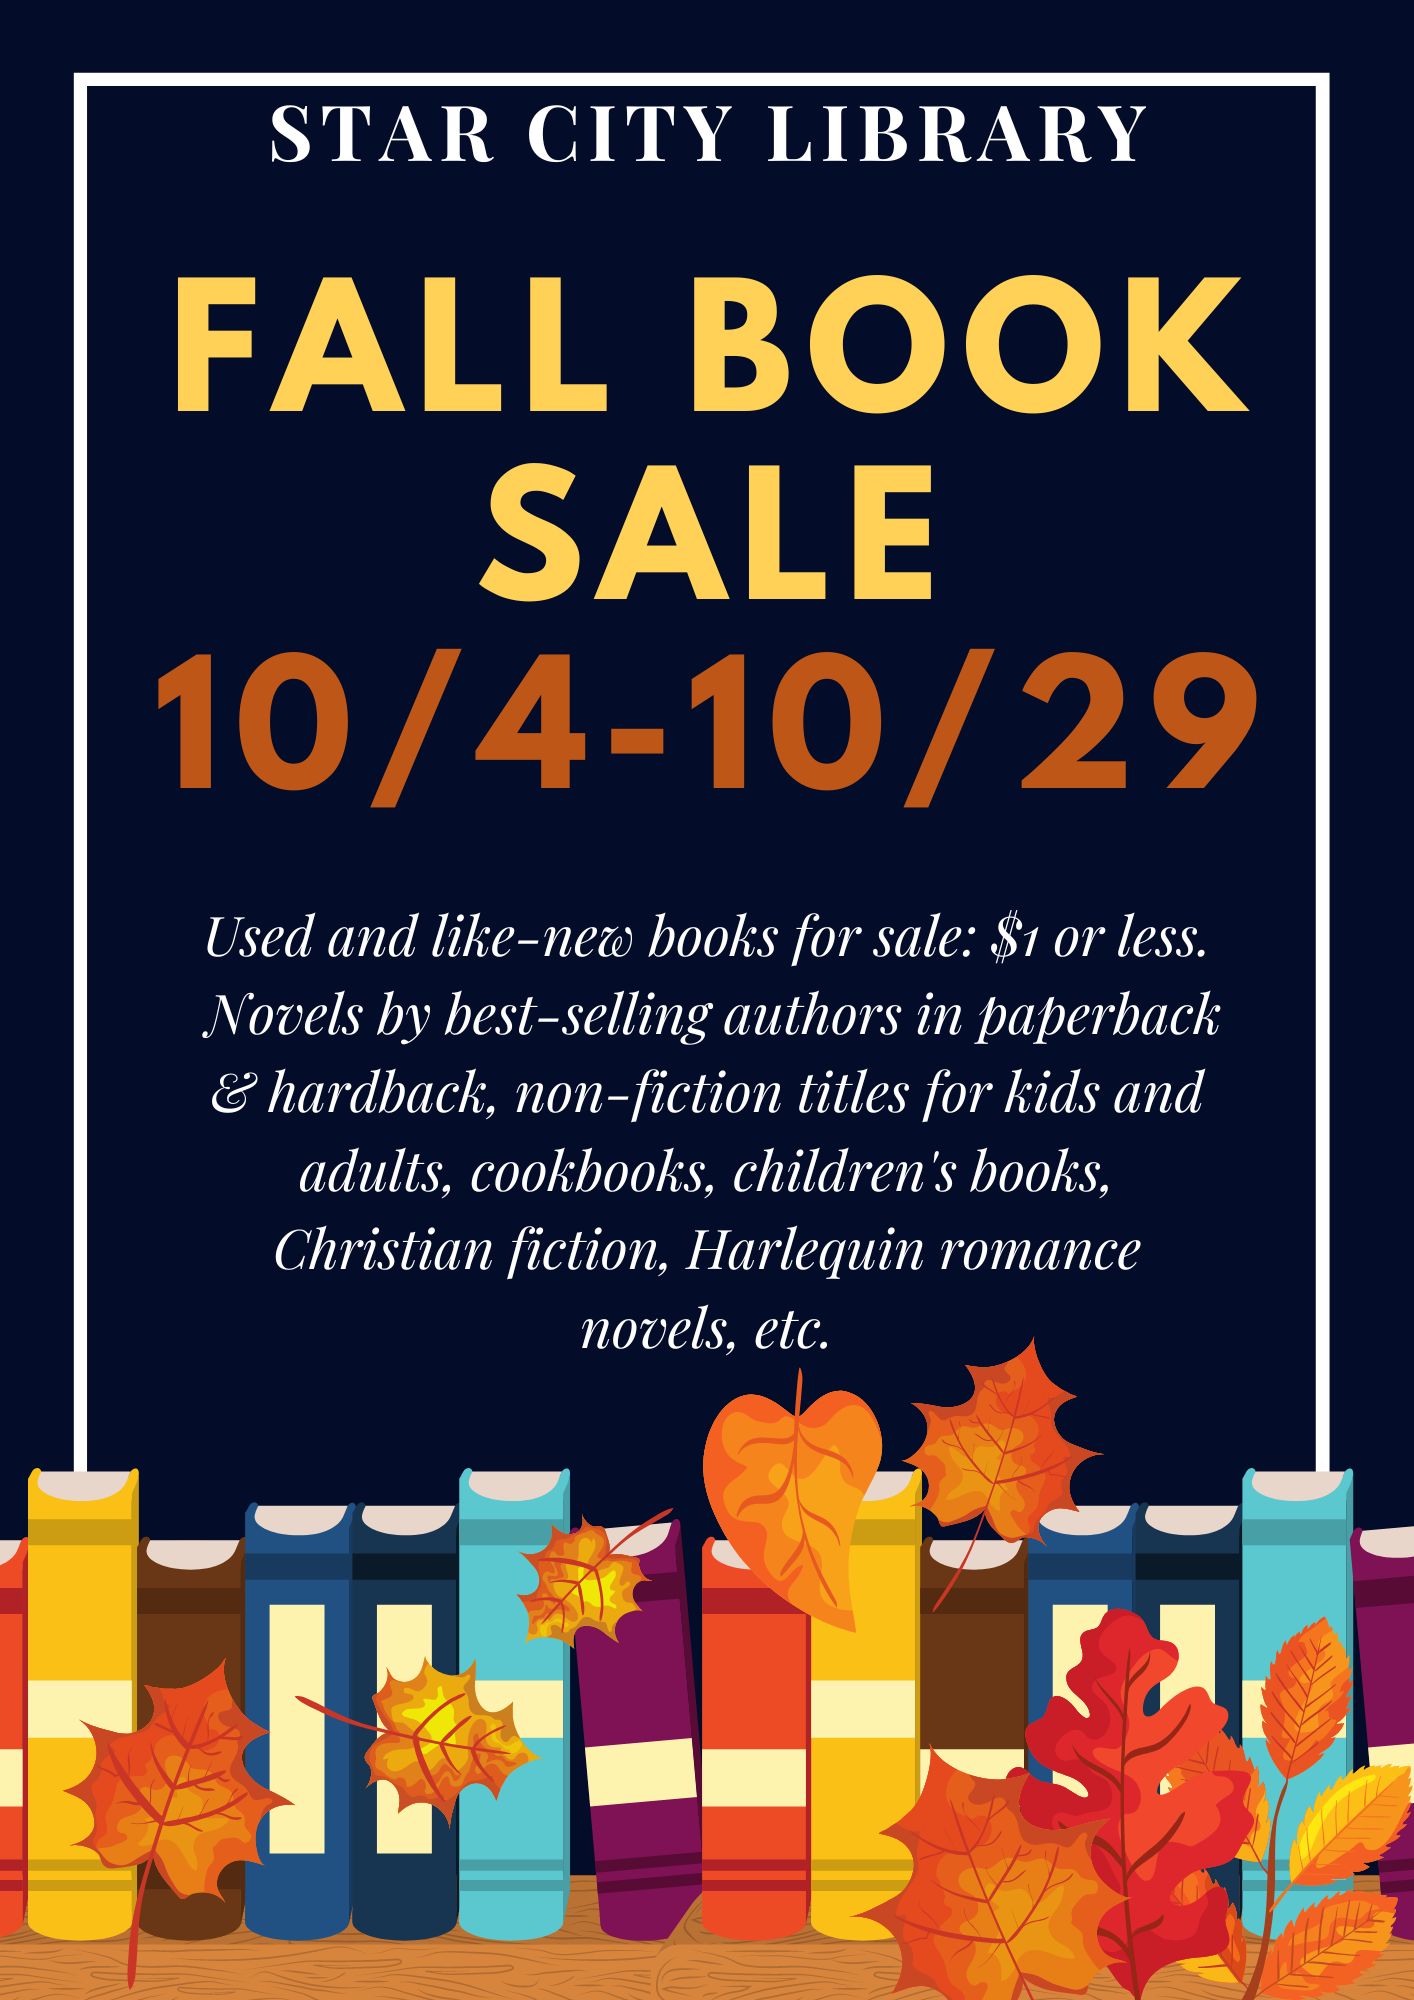 Fall Book Sale Poster with dates and info what is for sale